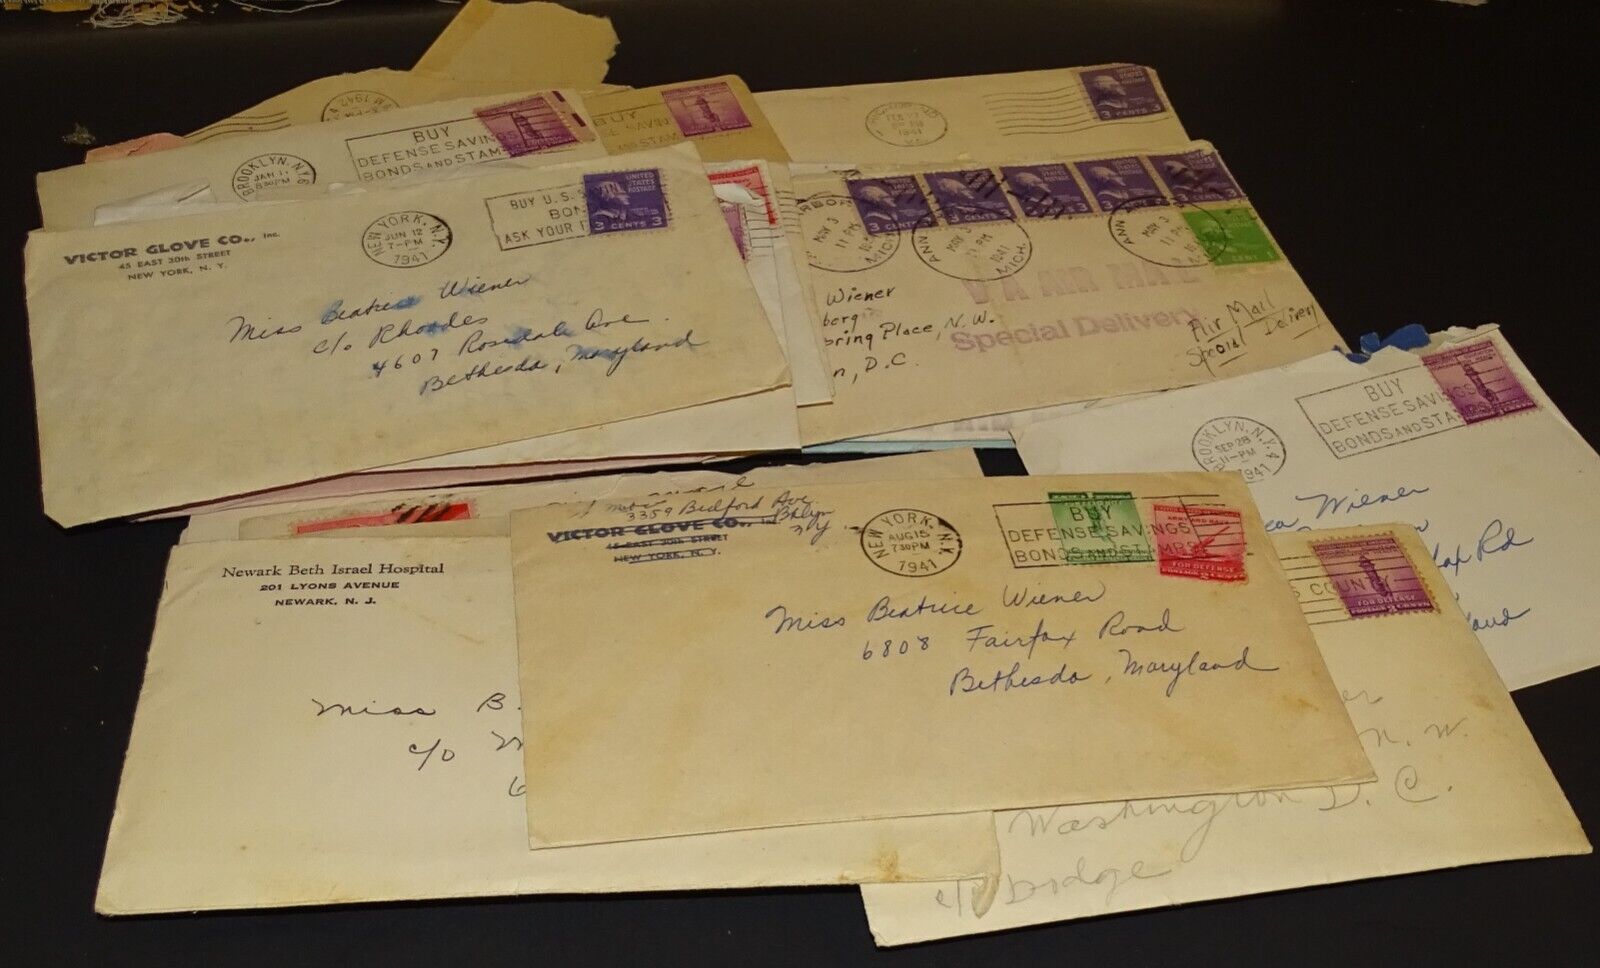 1941 & 1942 Correspondence (28 postmarked envelopes with notes & letters inside)